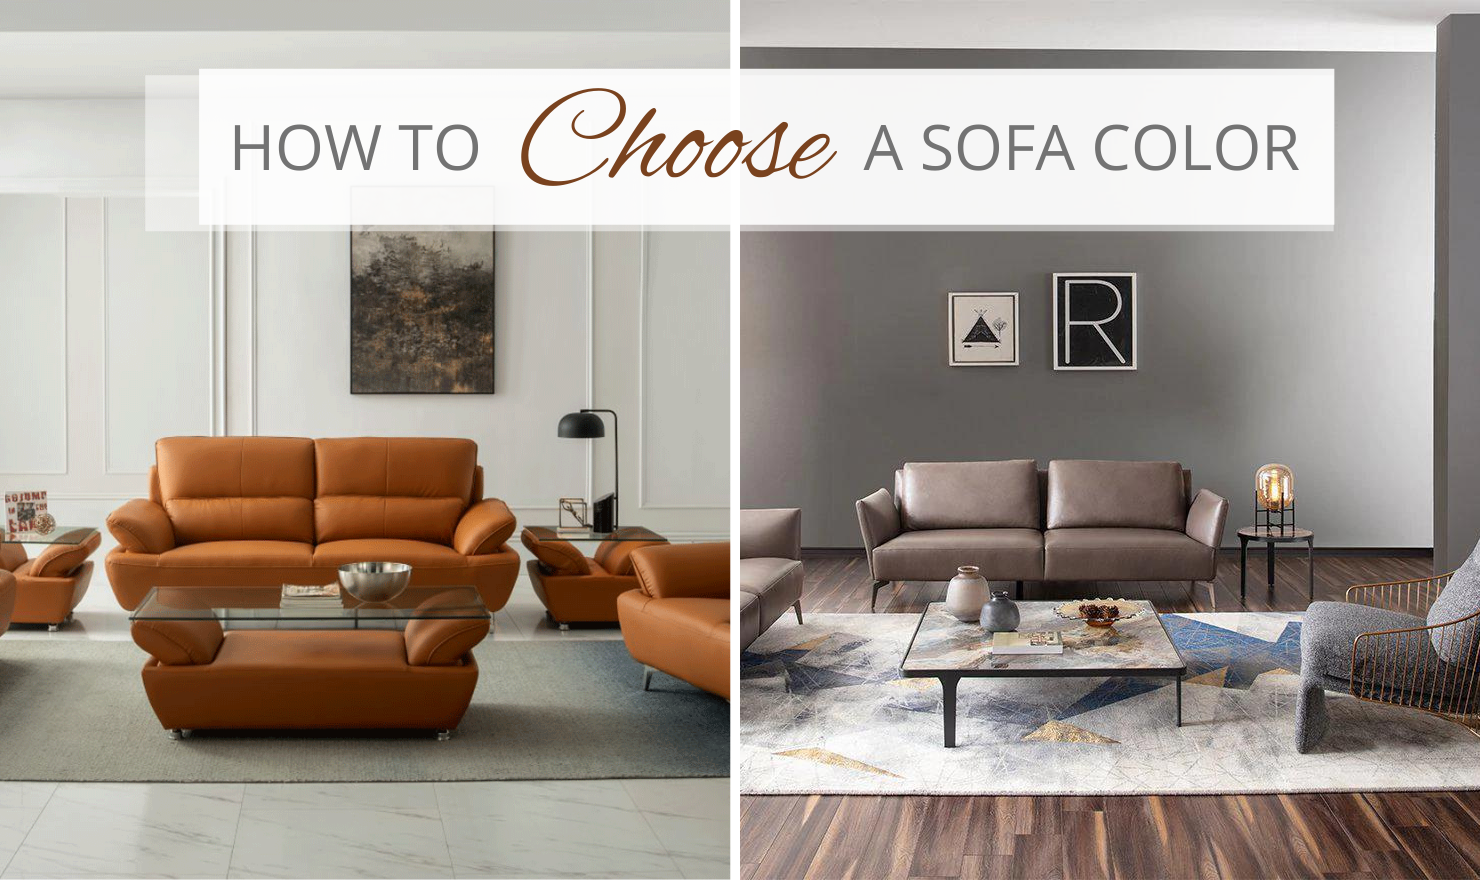 How to choose sofa color?